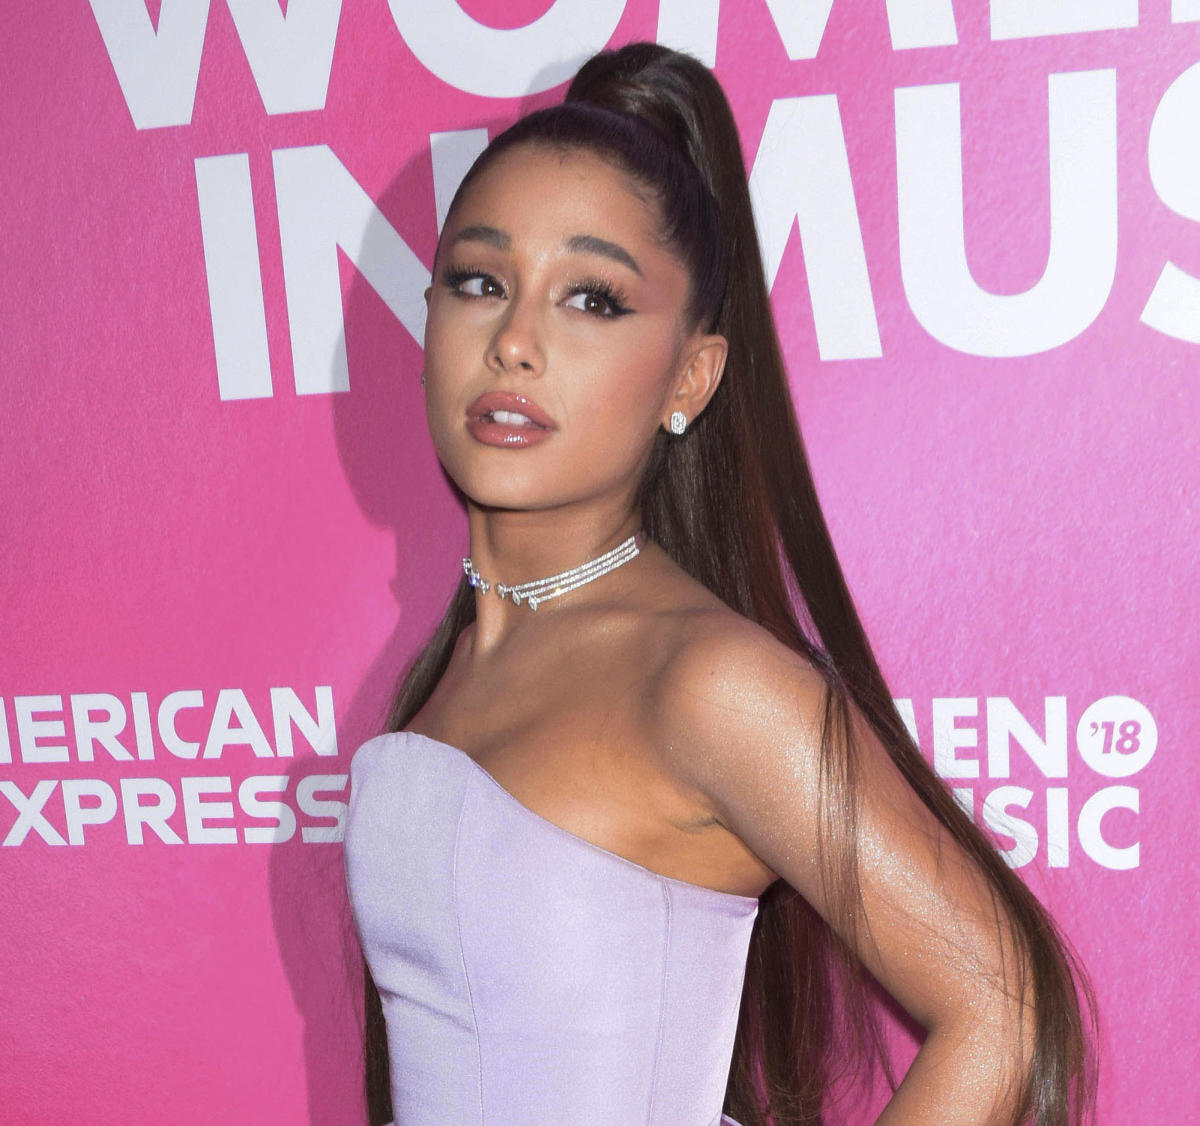 Fans say Ariana Grande looks 'too thin' in new Instagram photo